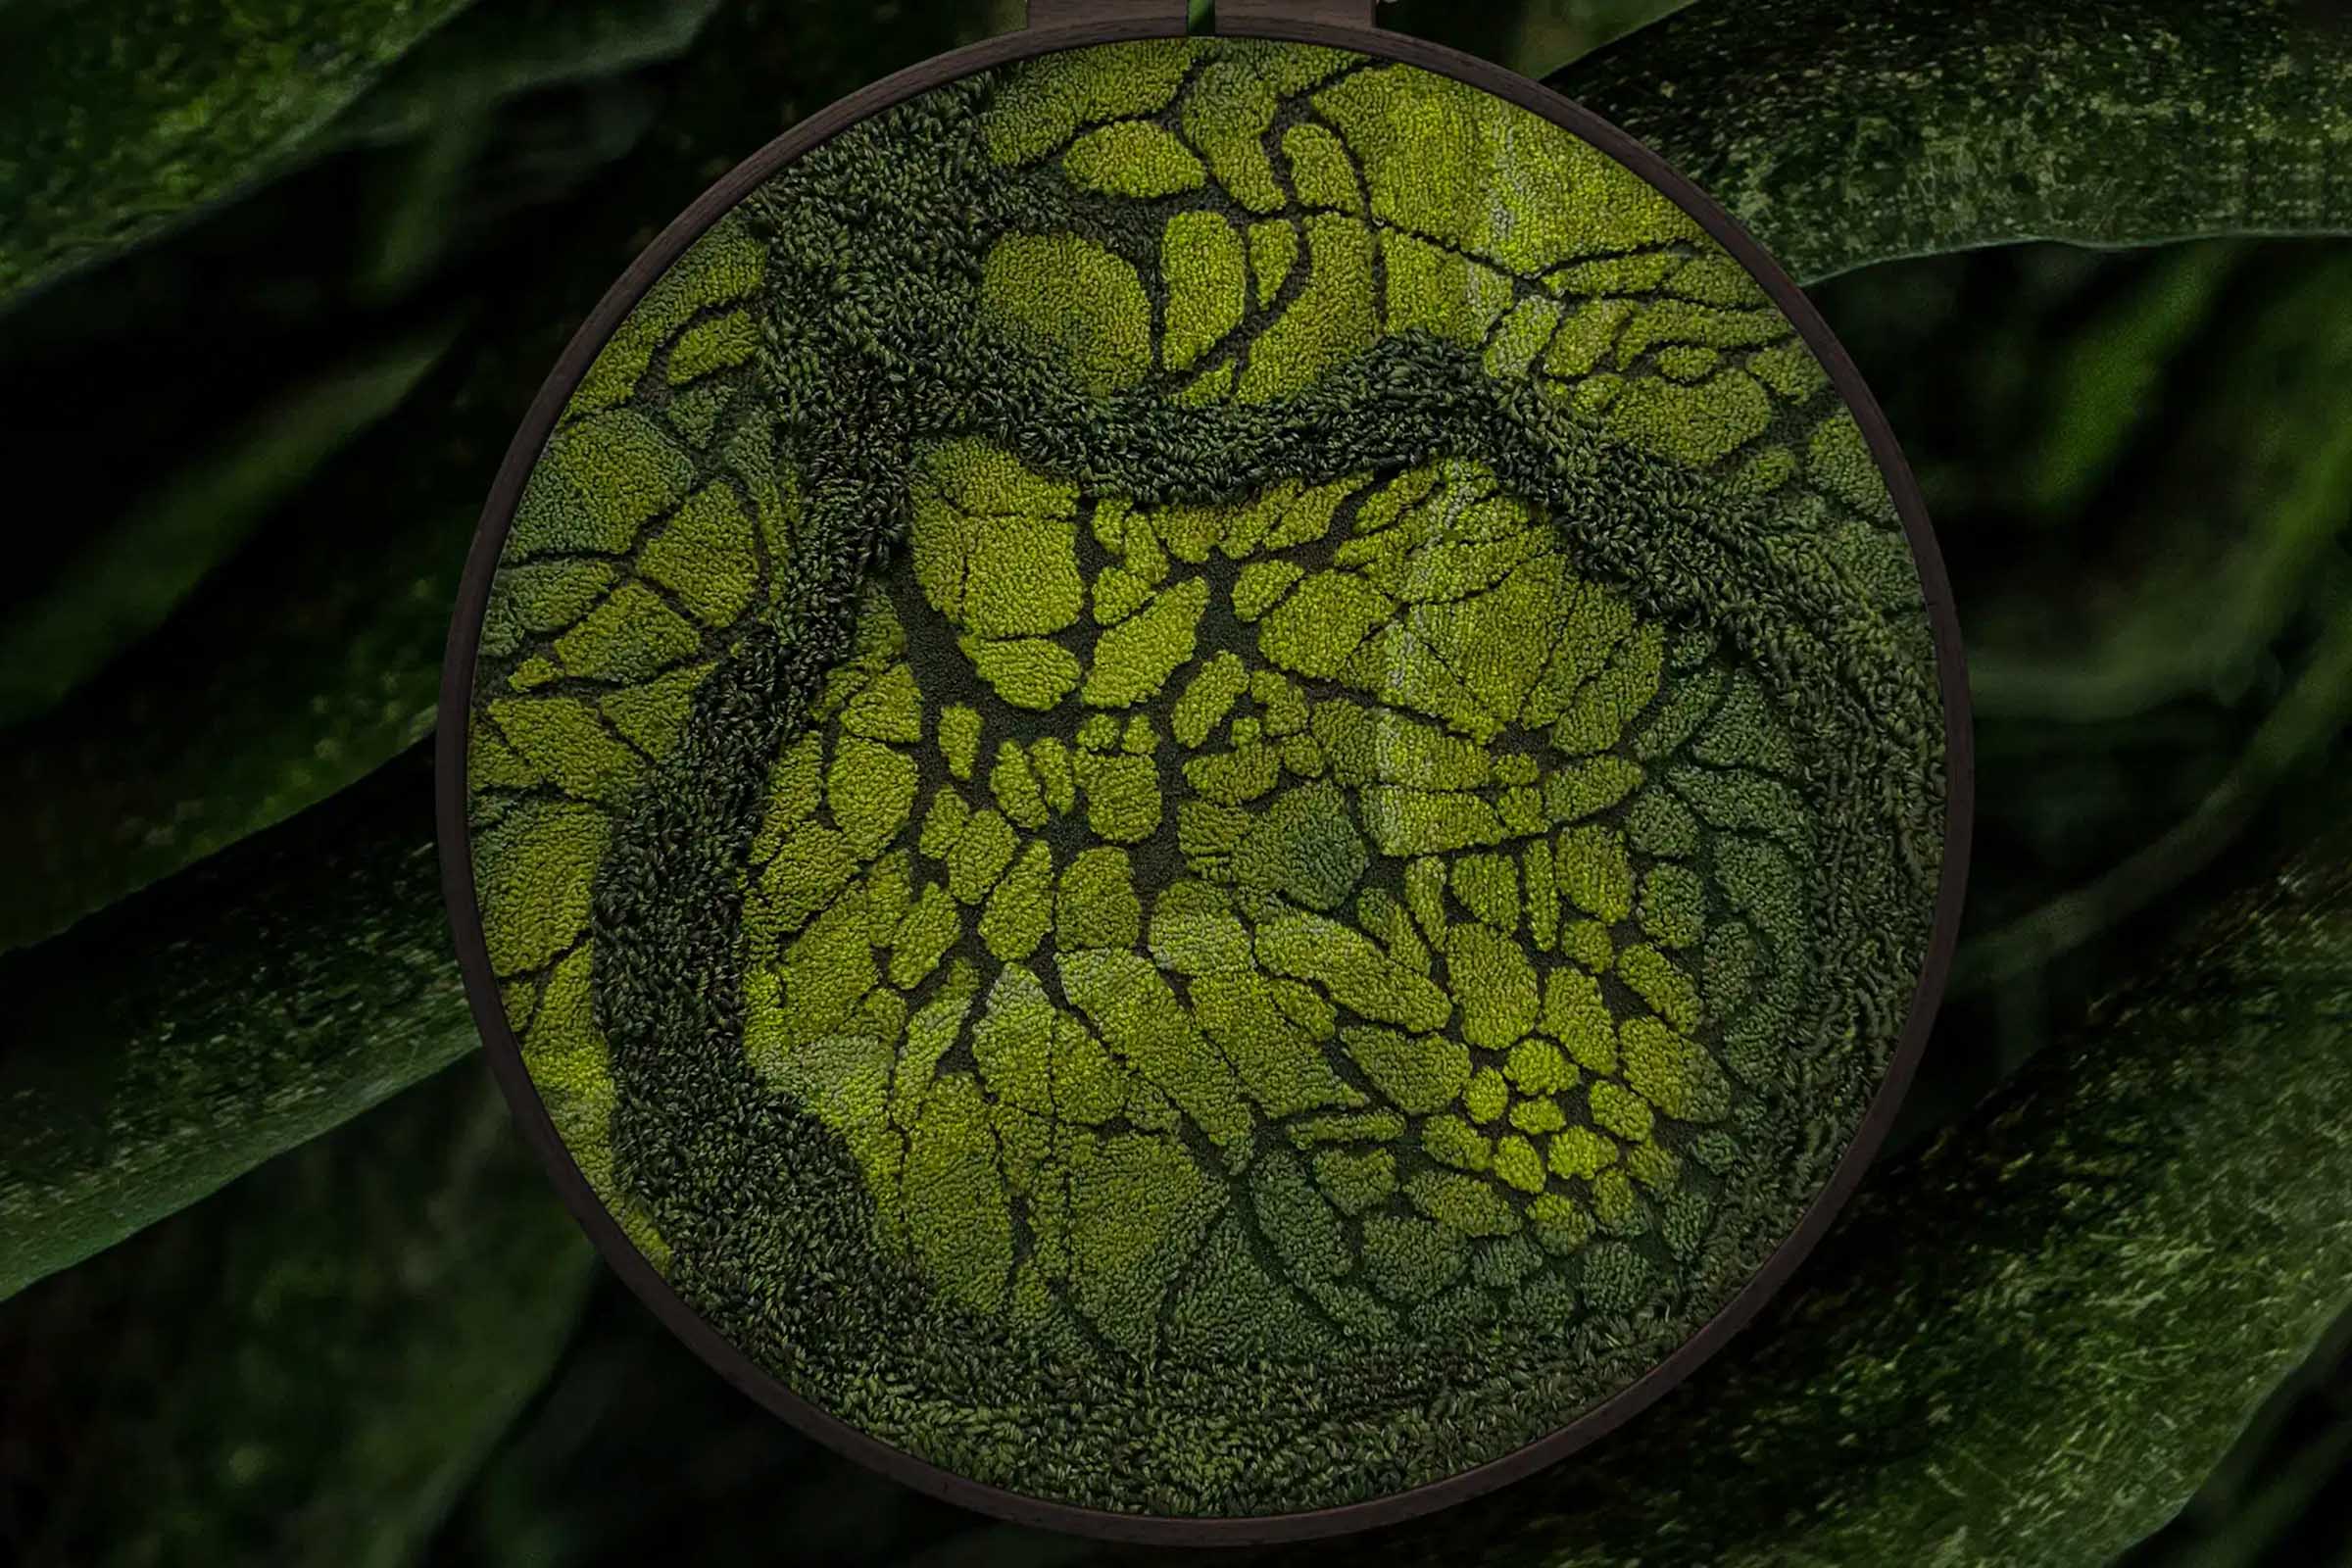 Mossy Mazes and Dense Forest Embroideries by Litli Ulfur wide feature on Thursd